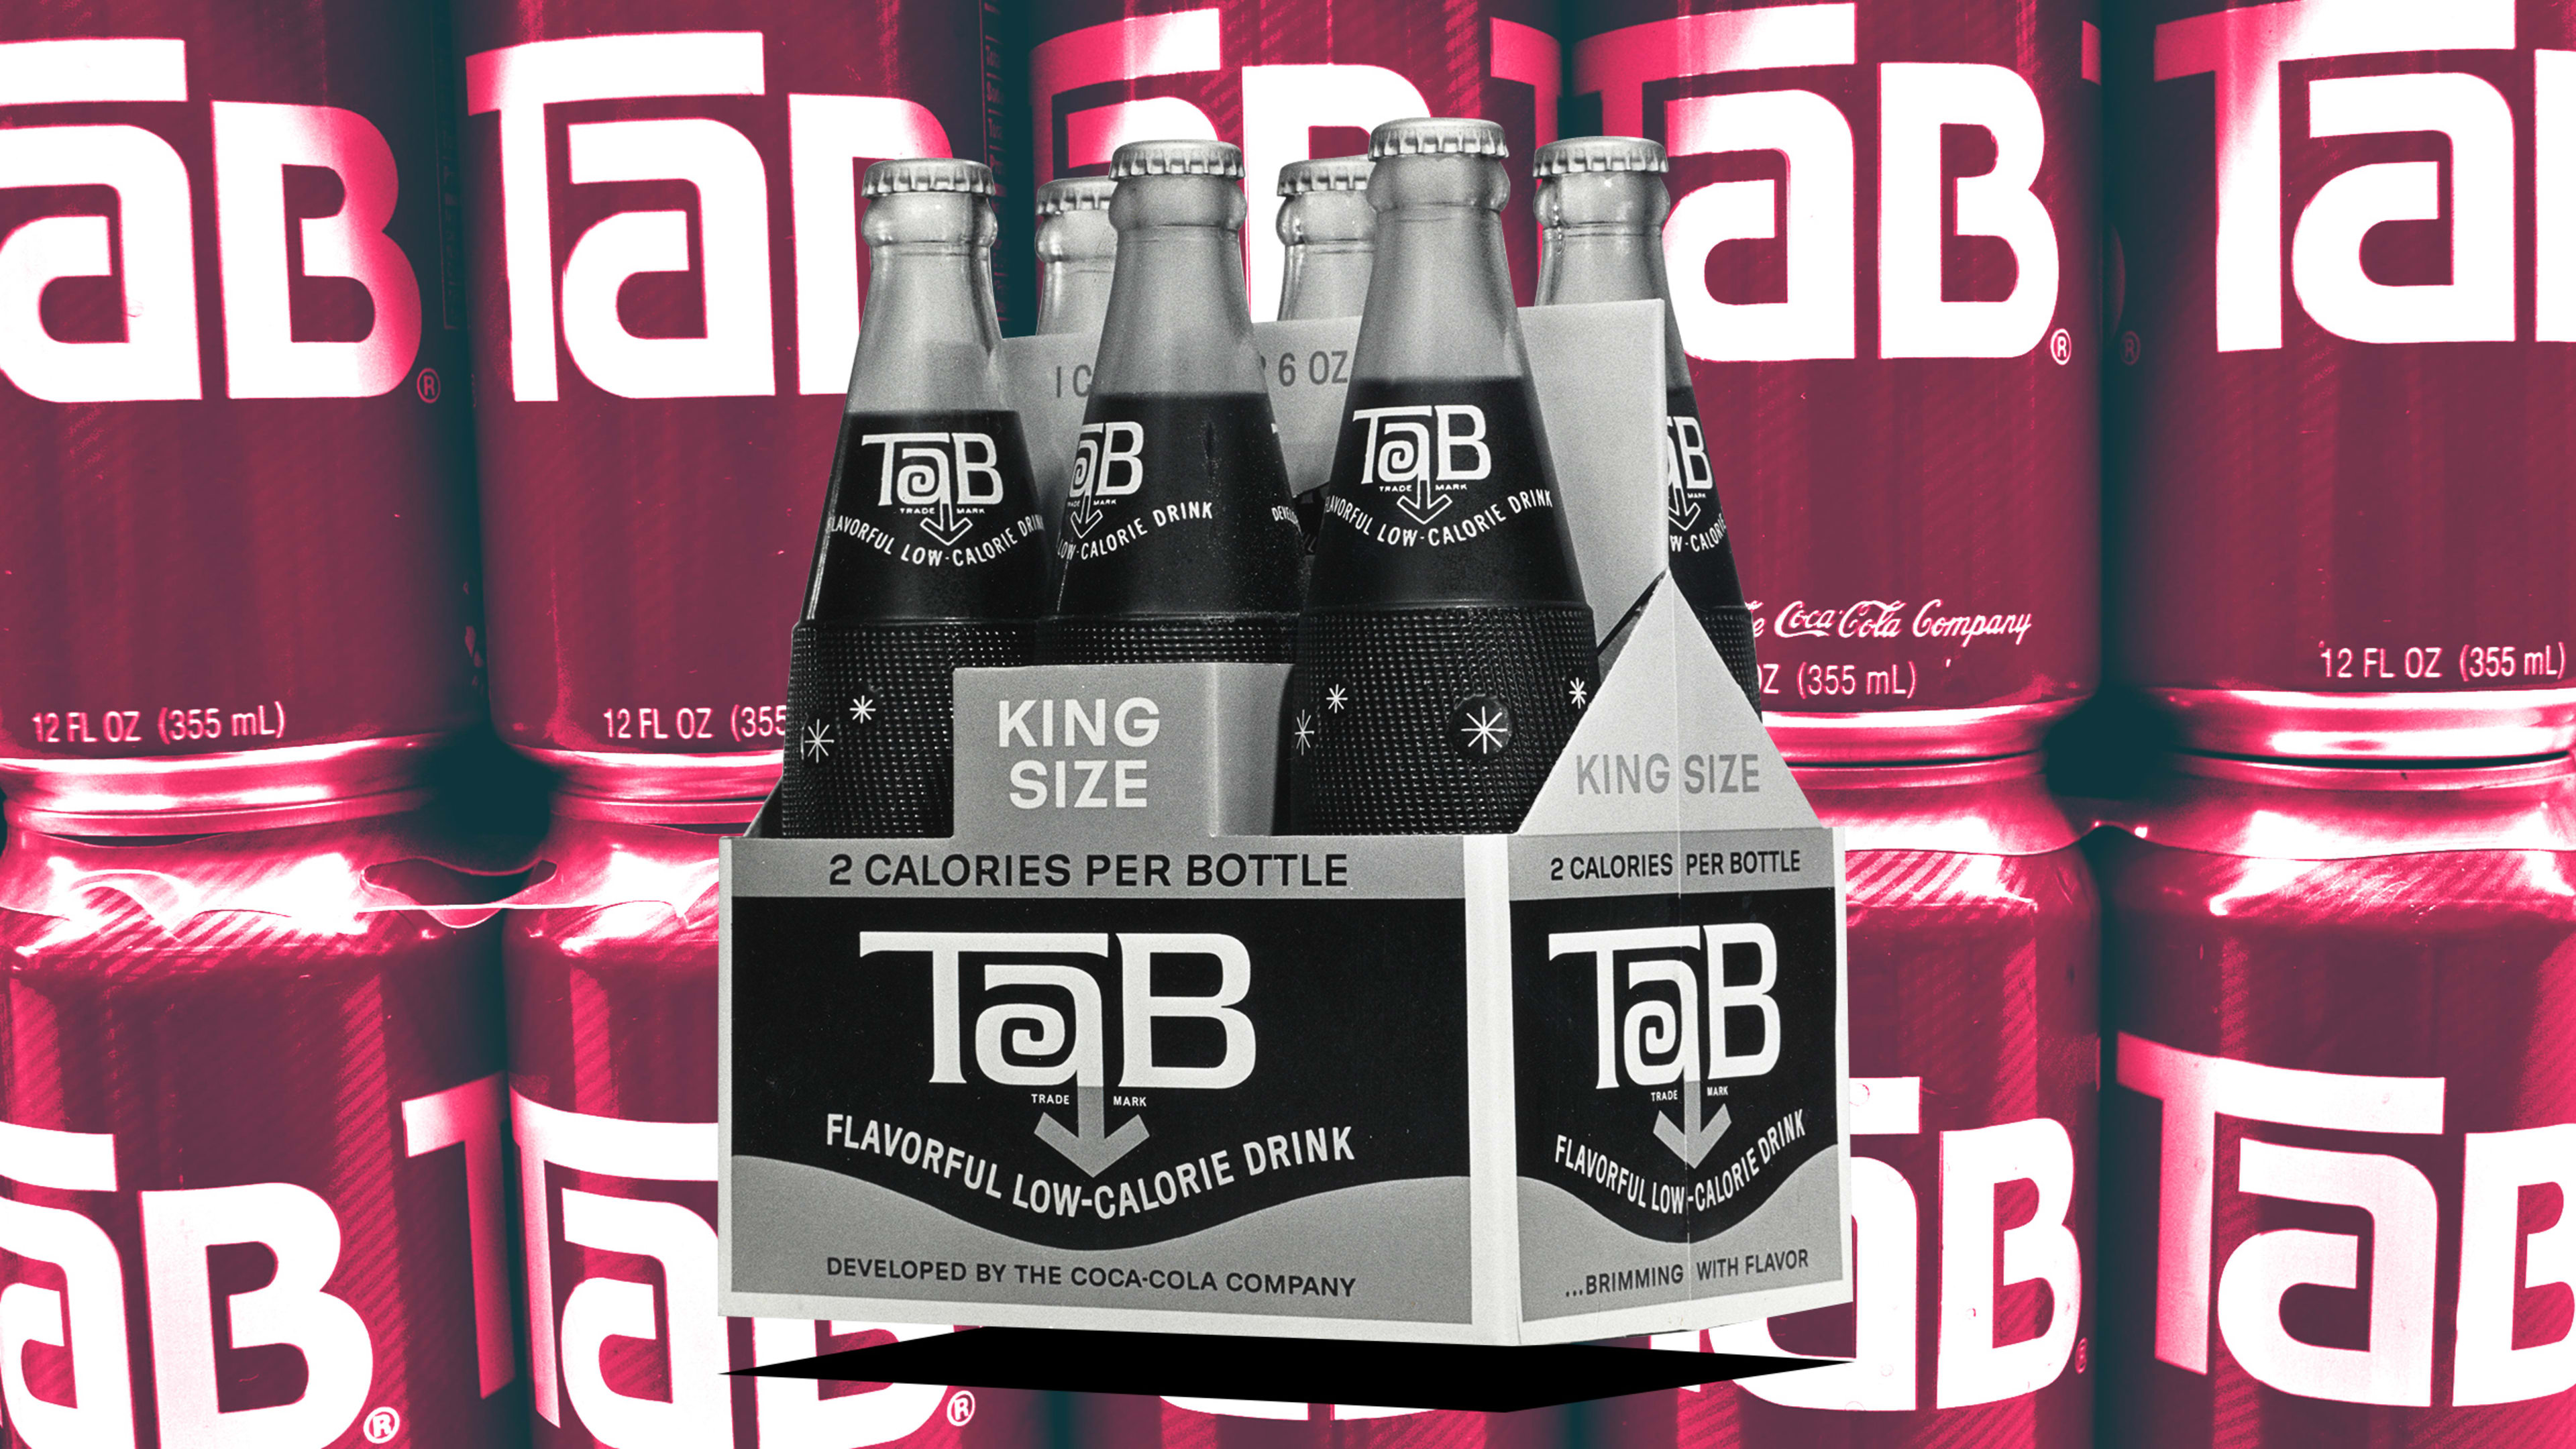 A brief history of Tab, the iconic diet soda that’s headed to the graveyard